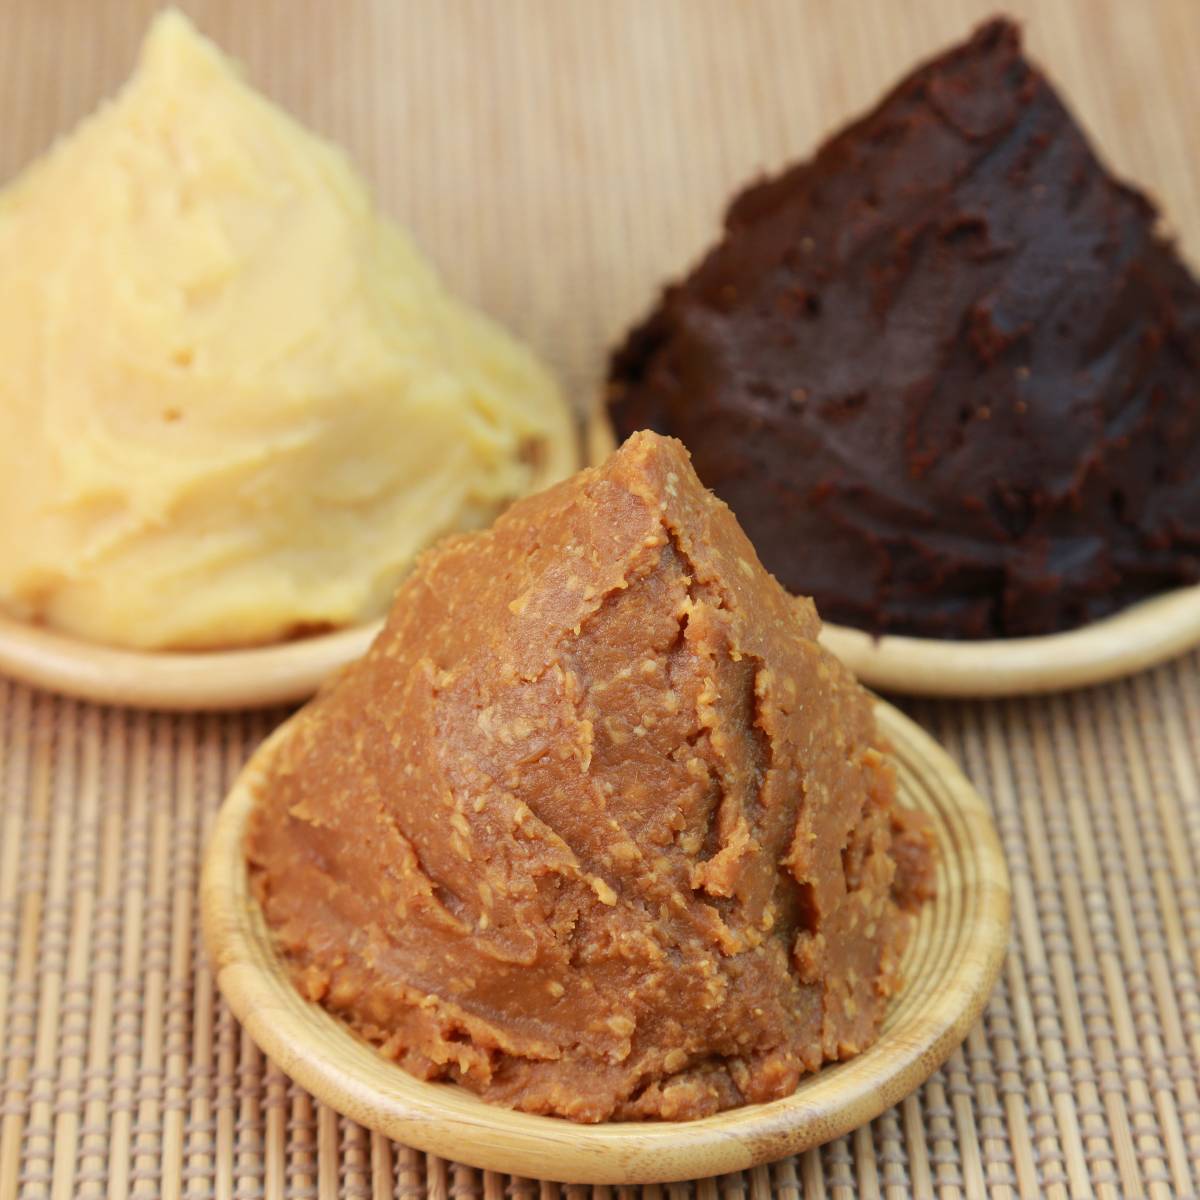 Different kinds of Miso Paste includes white, yellow and red color